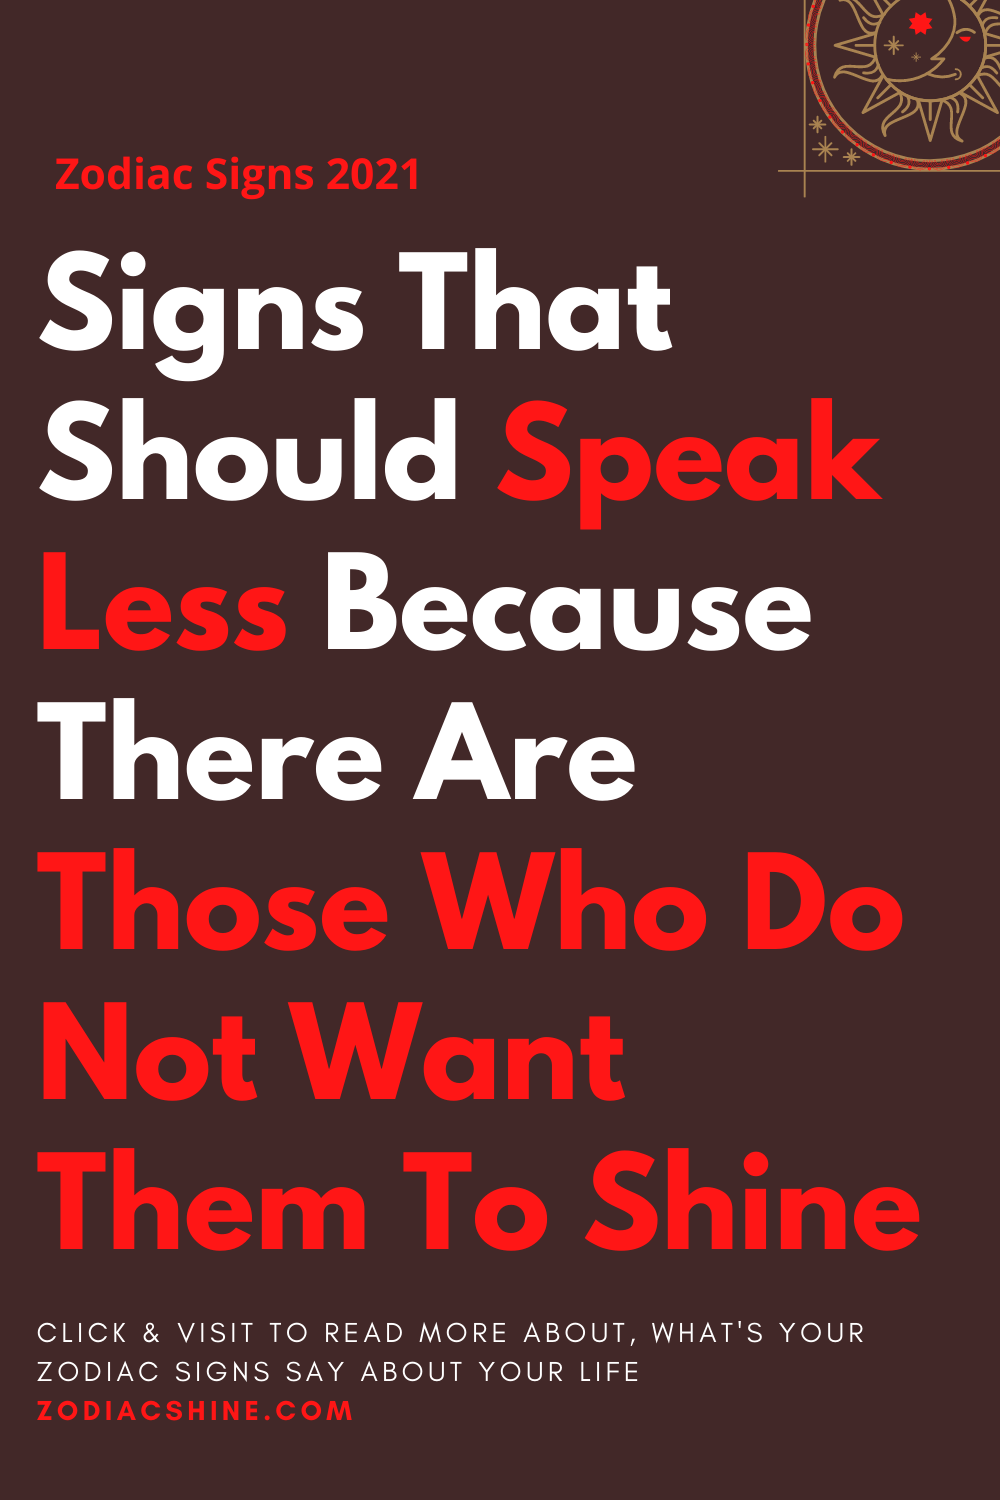 Signs That Should Speak Less Because There Are Those Who Do Not Want Them To Shine